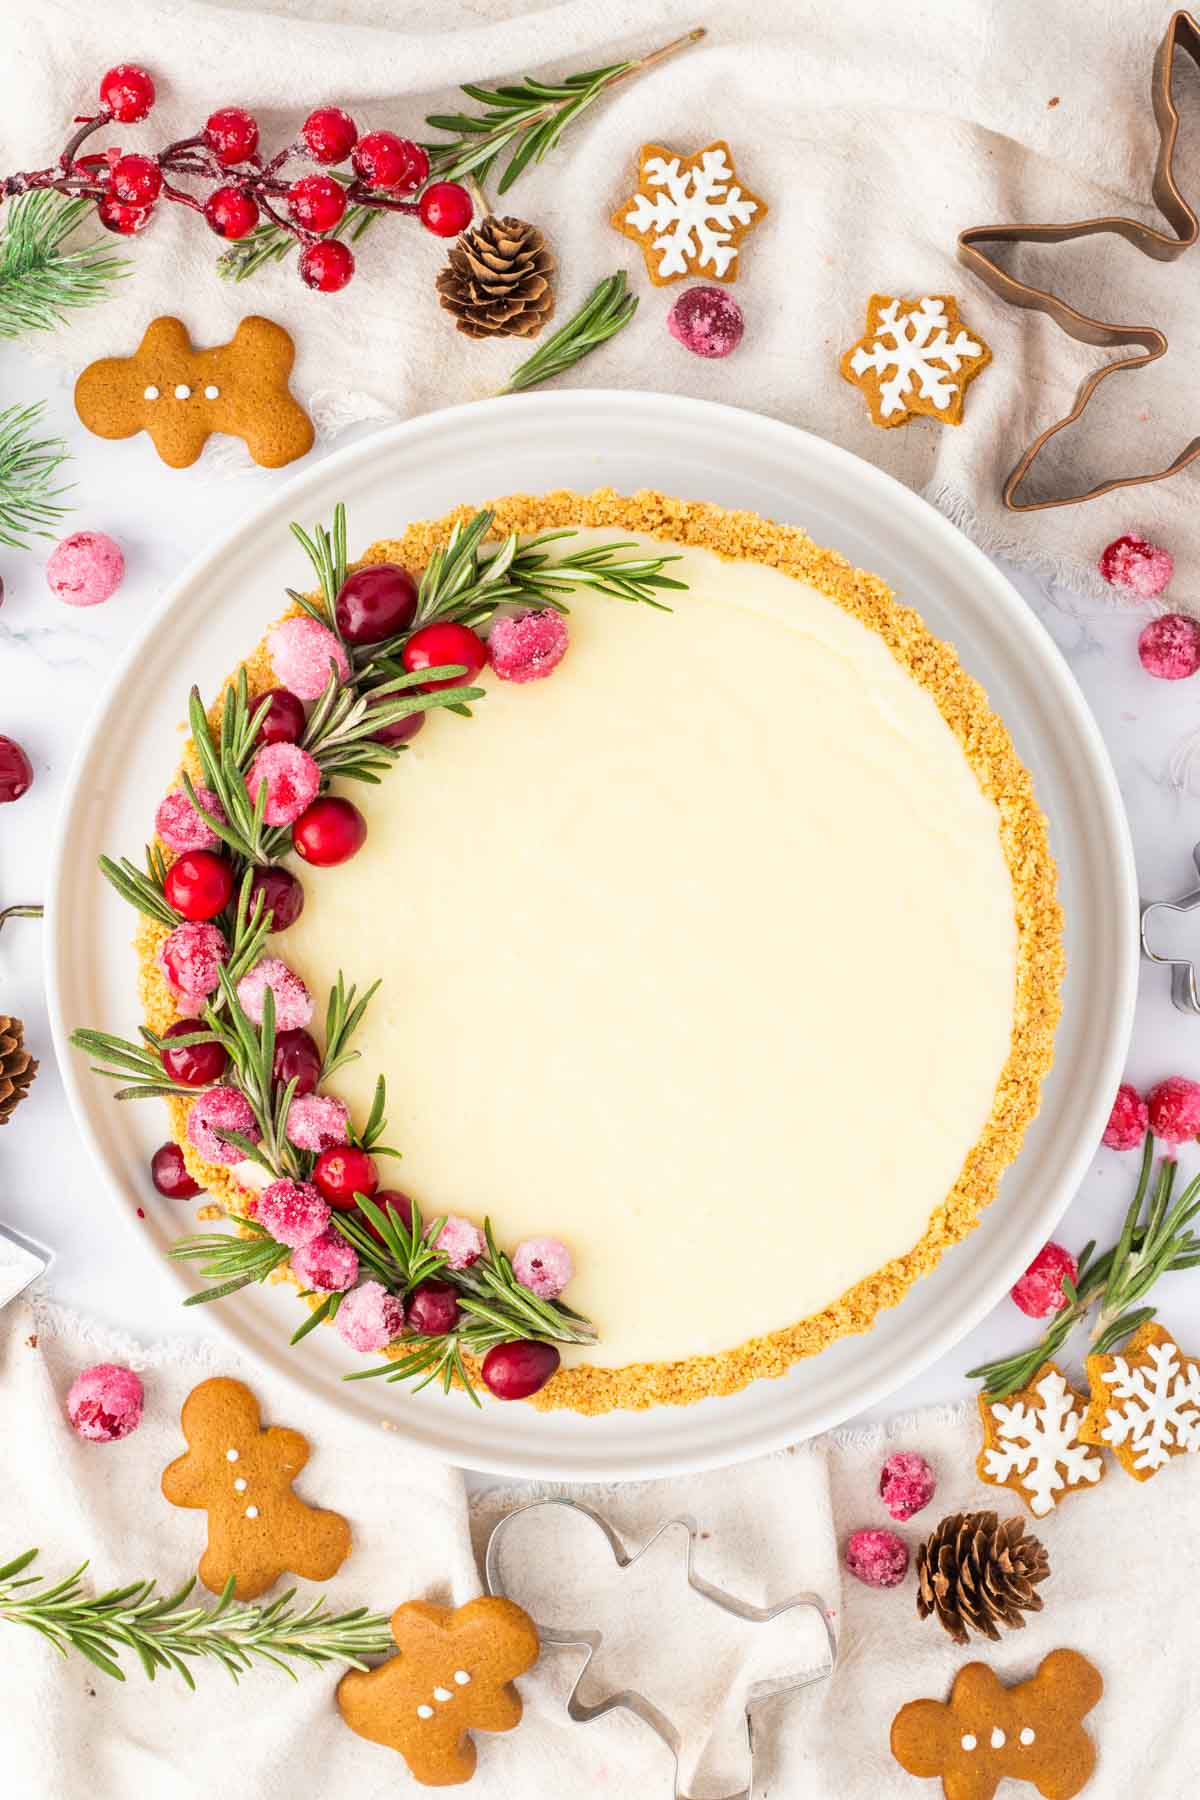 A white chocolate tart garnished with sugared cranberries set on a tablescape with gingerbread men.